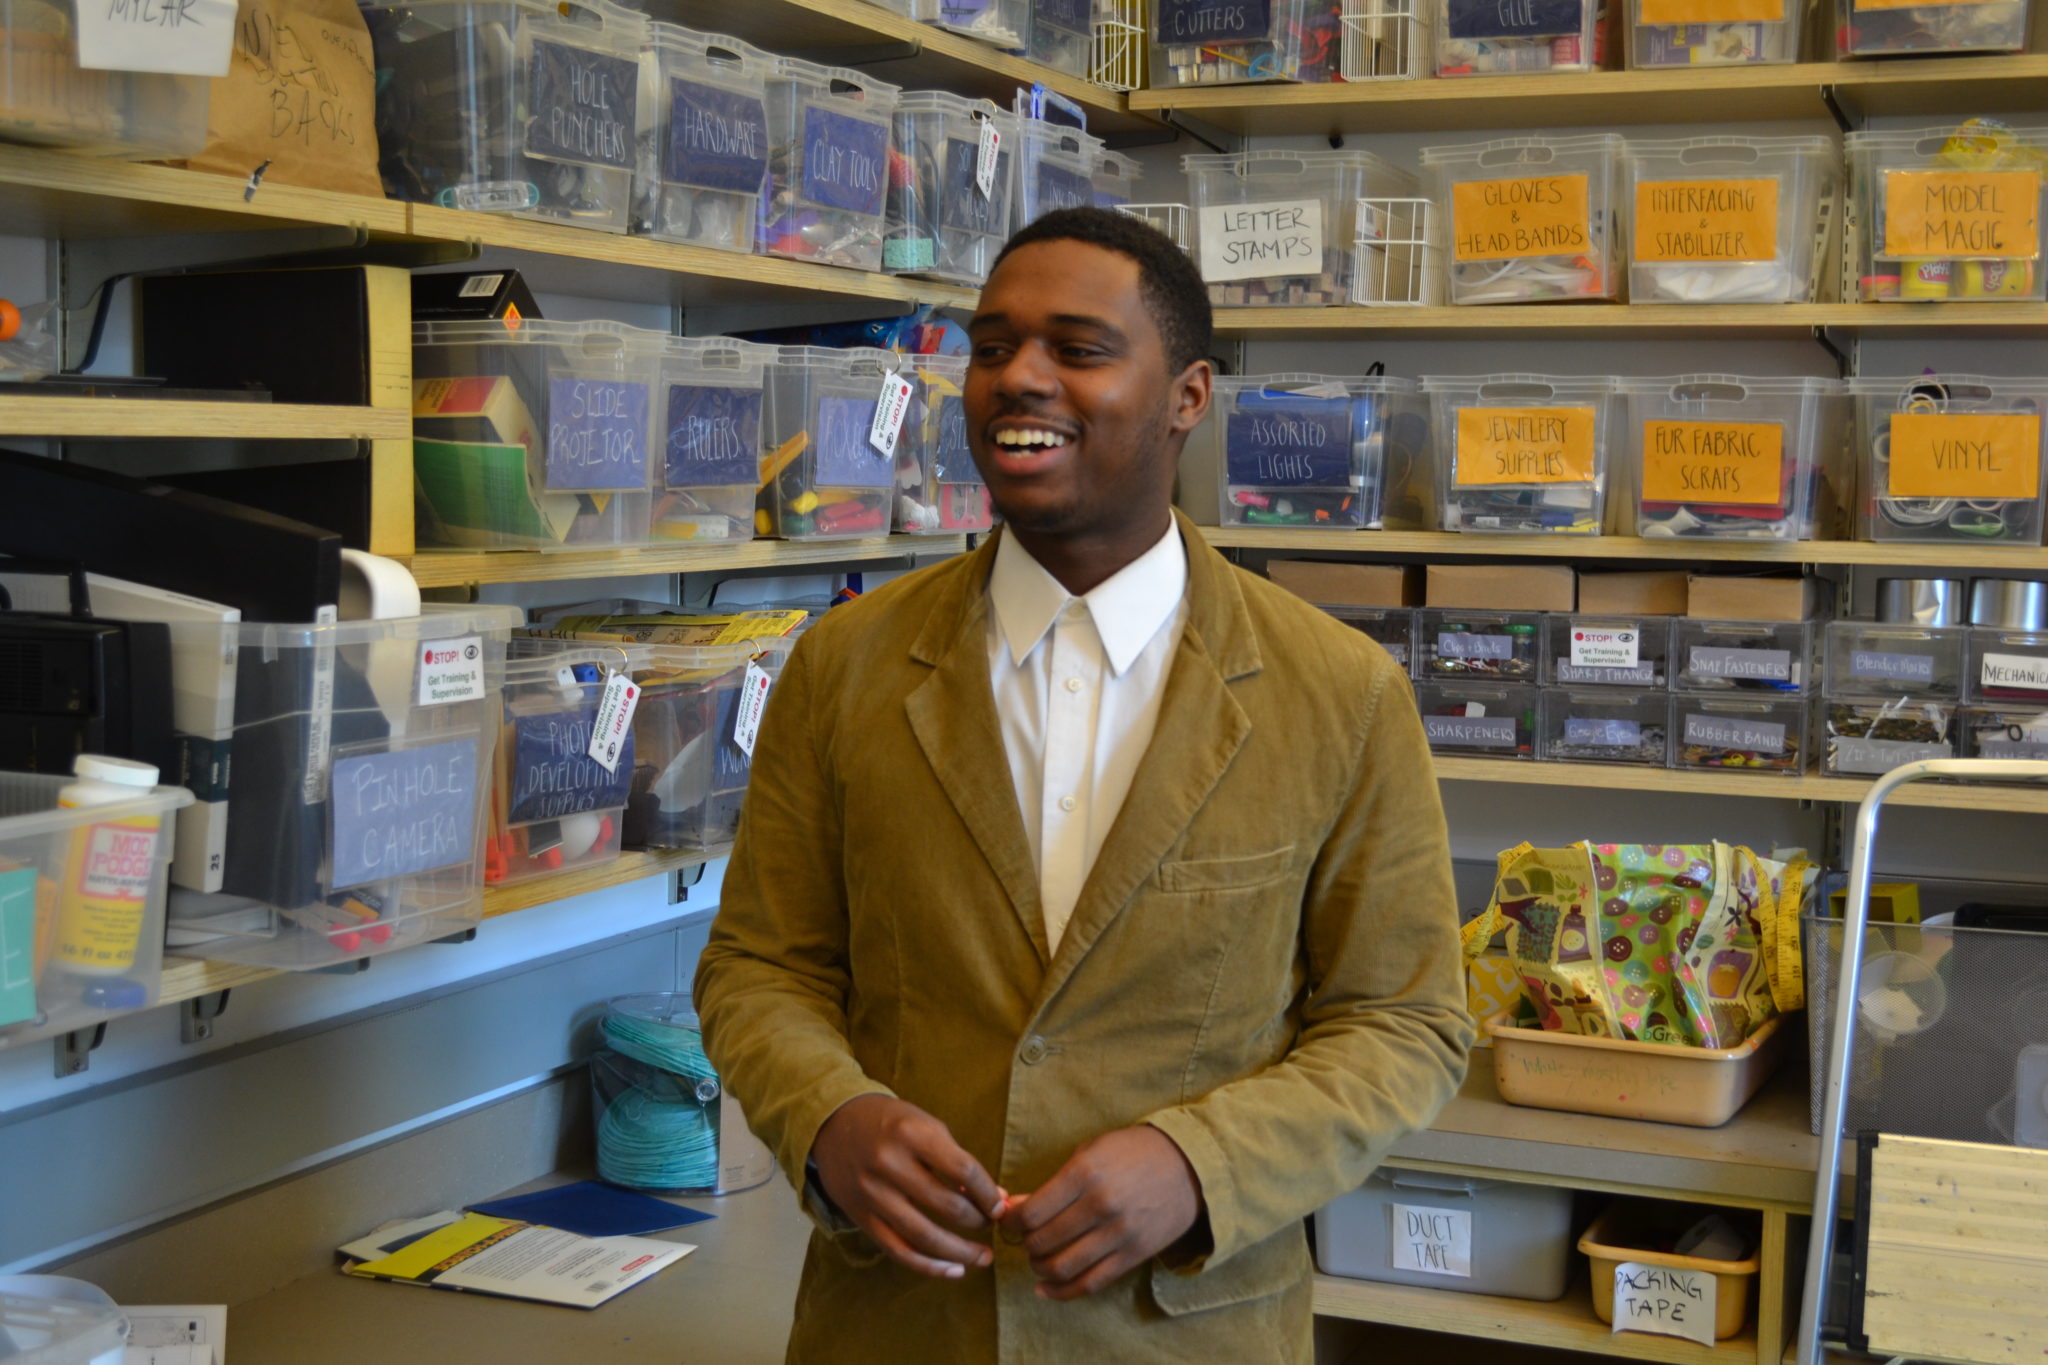 Andre Williams now mentors at the studio he began attending and is working on a marketing degree from Columbus State.